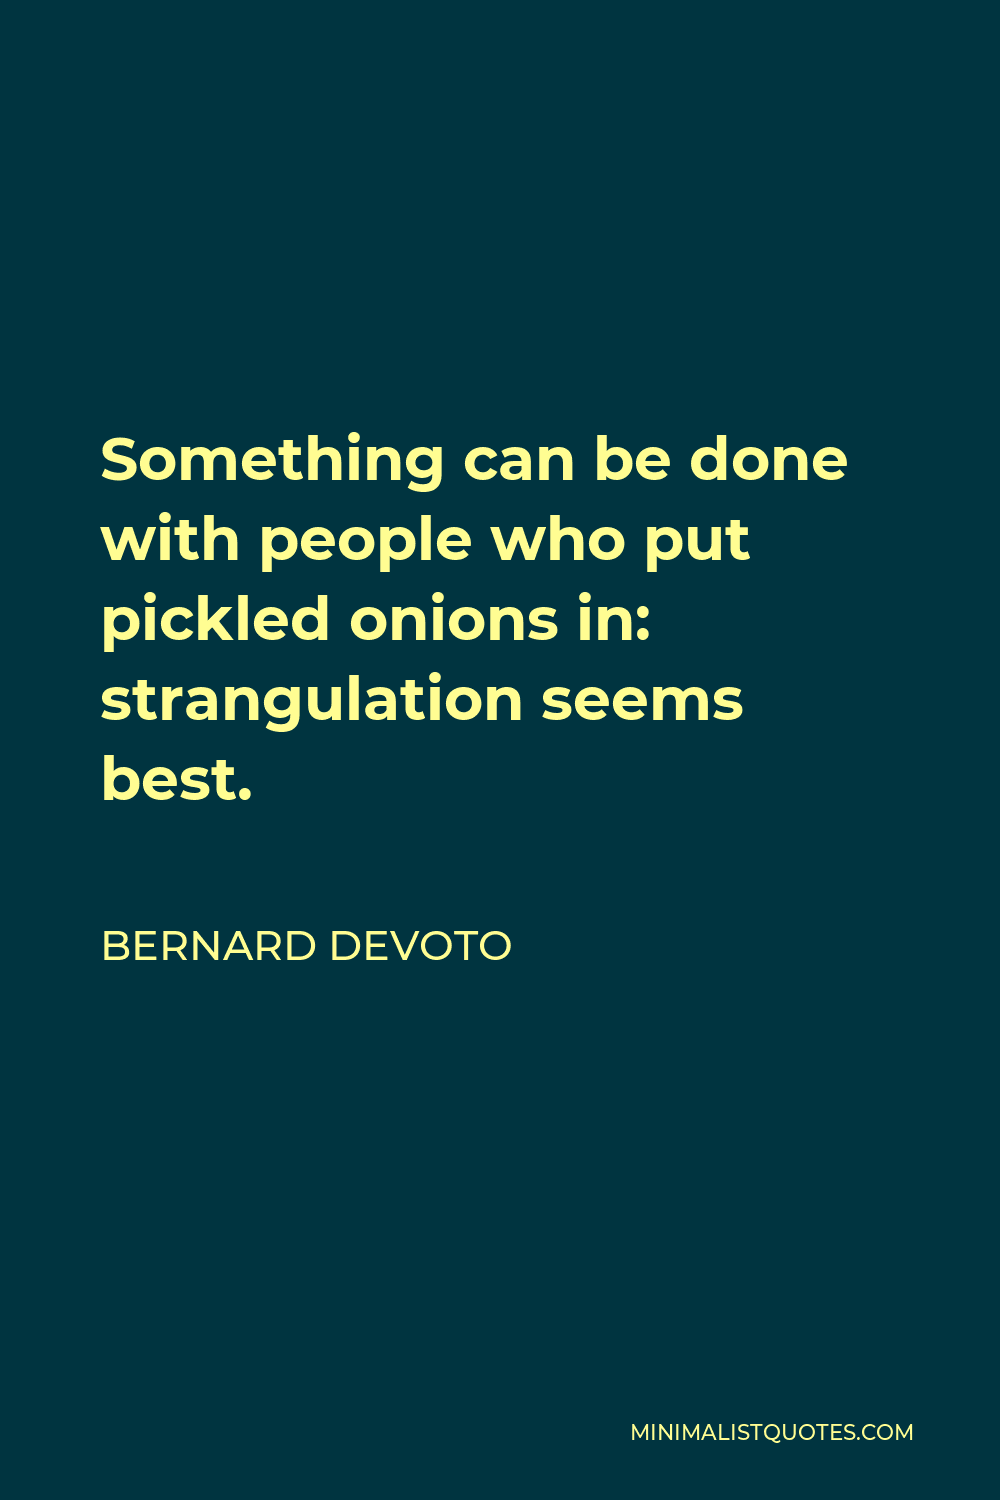 Bernard DeVoto Quote - Something can be done with people who put pickled onions in: strangulation seems best.